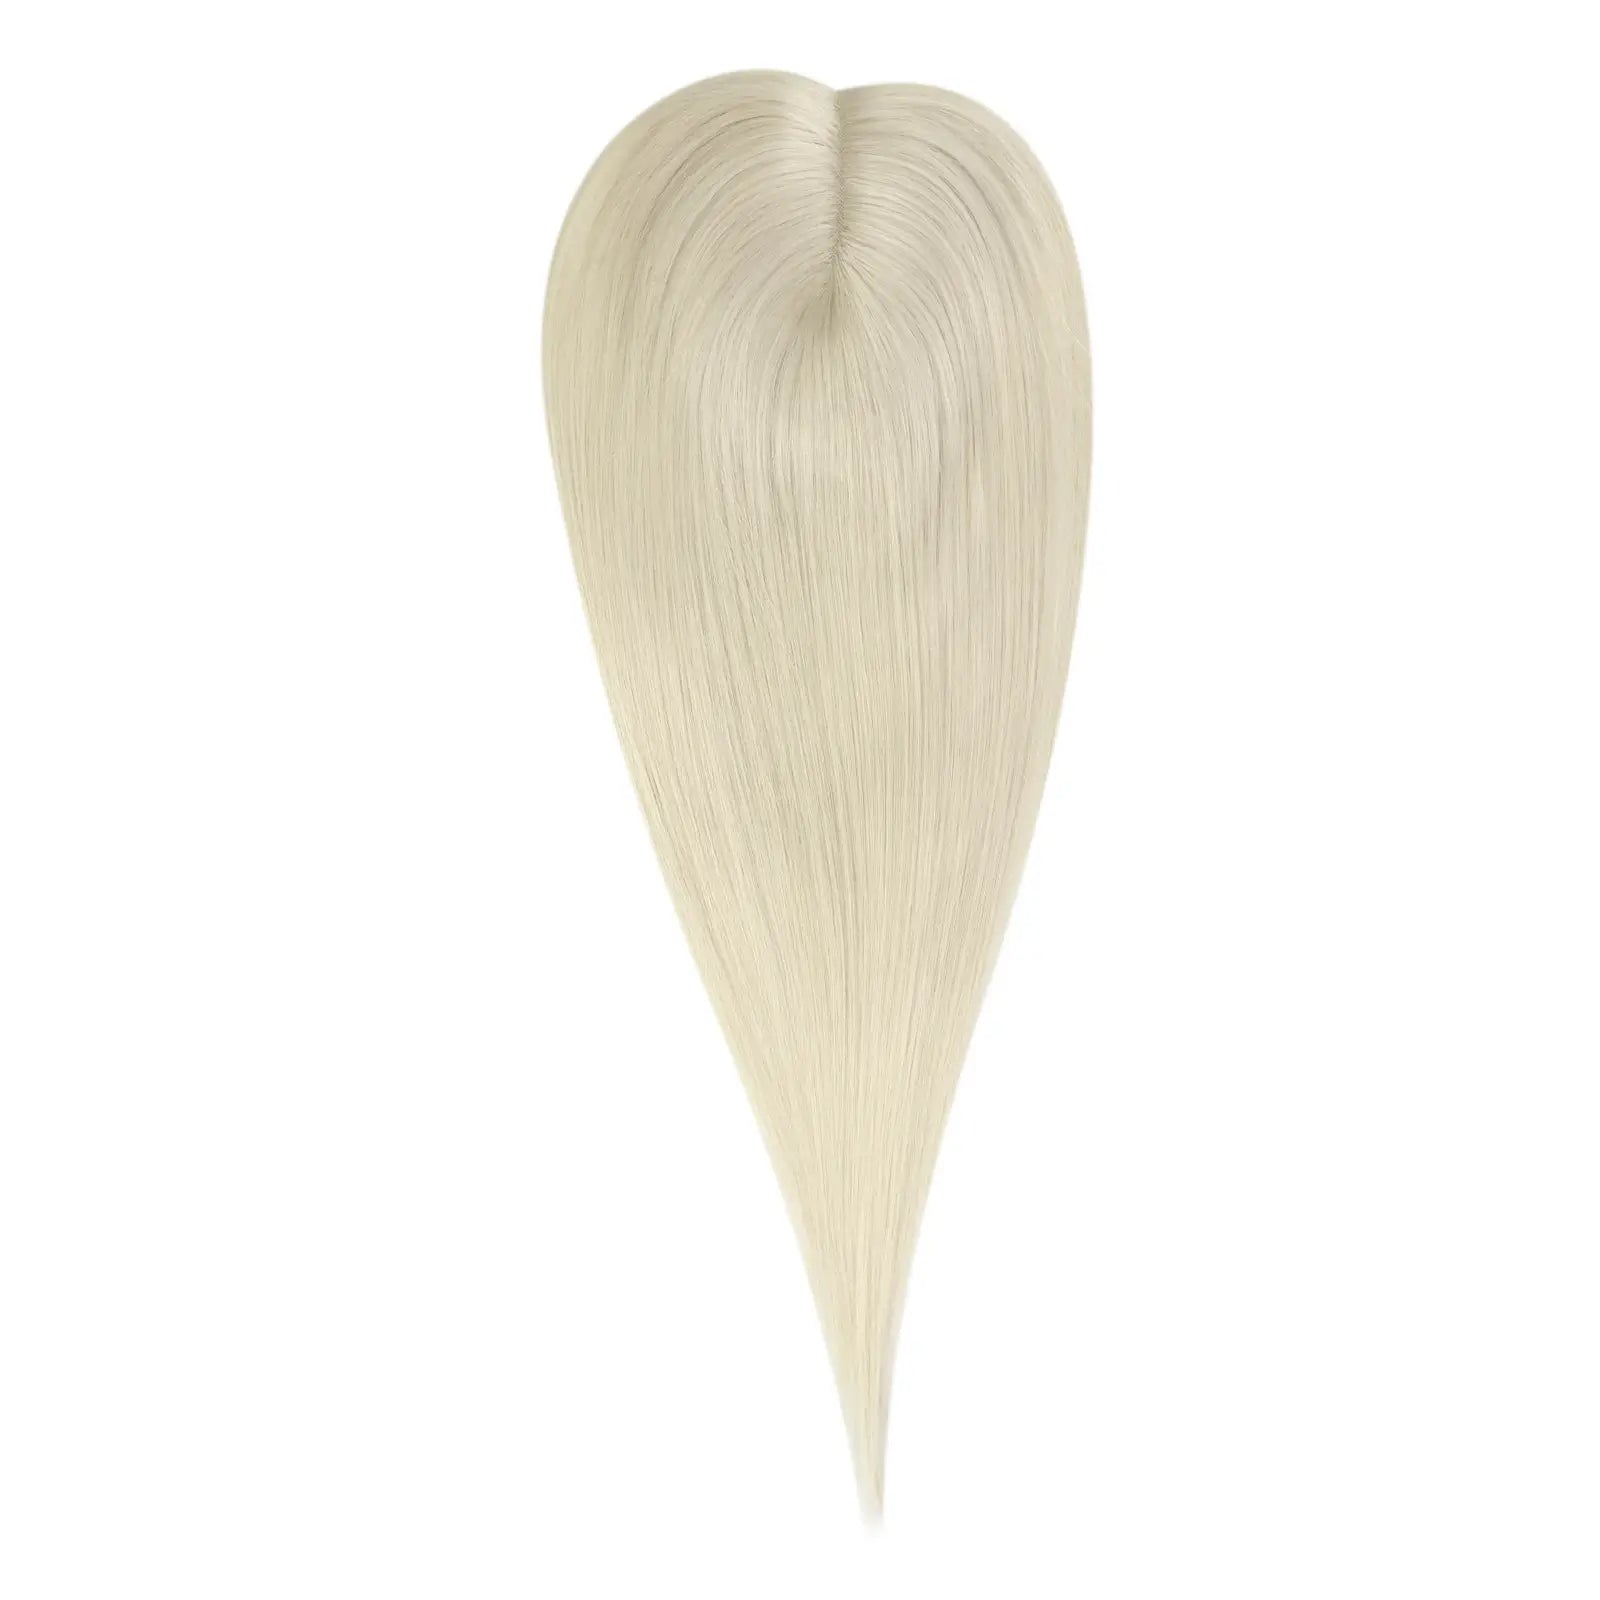 Pure blonde hairpieces real human hair for women